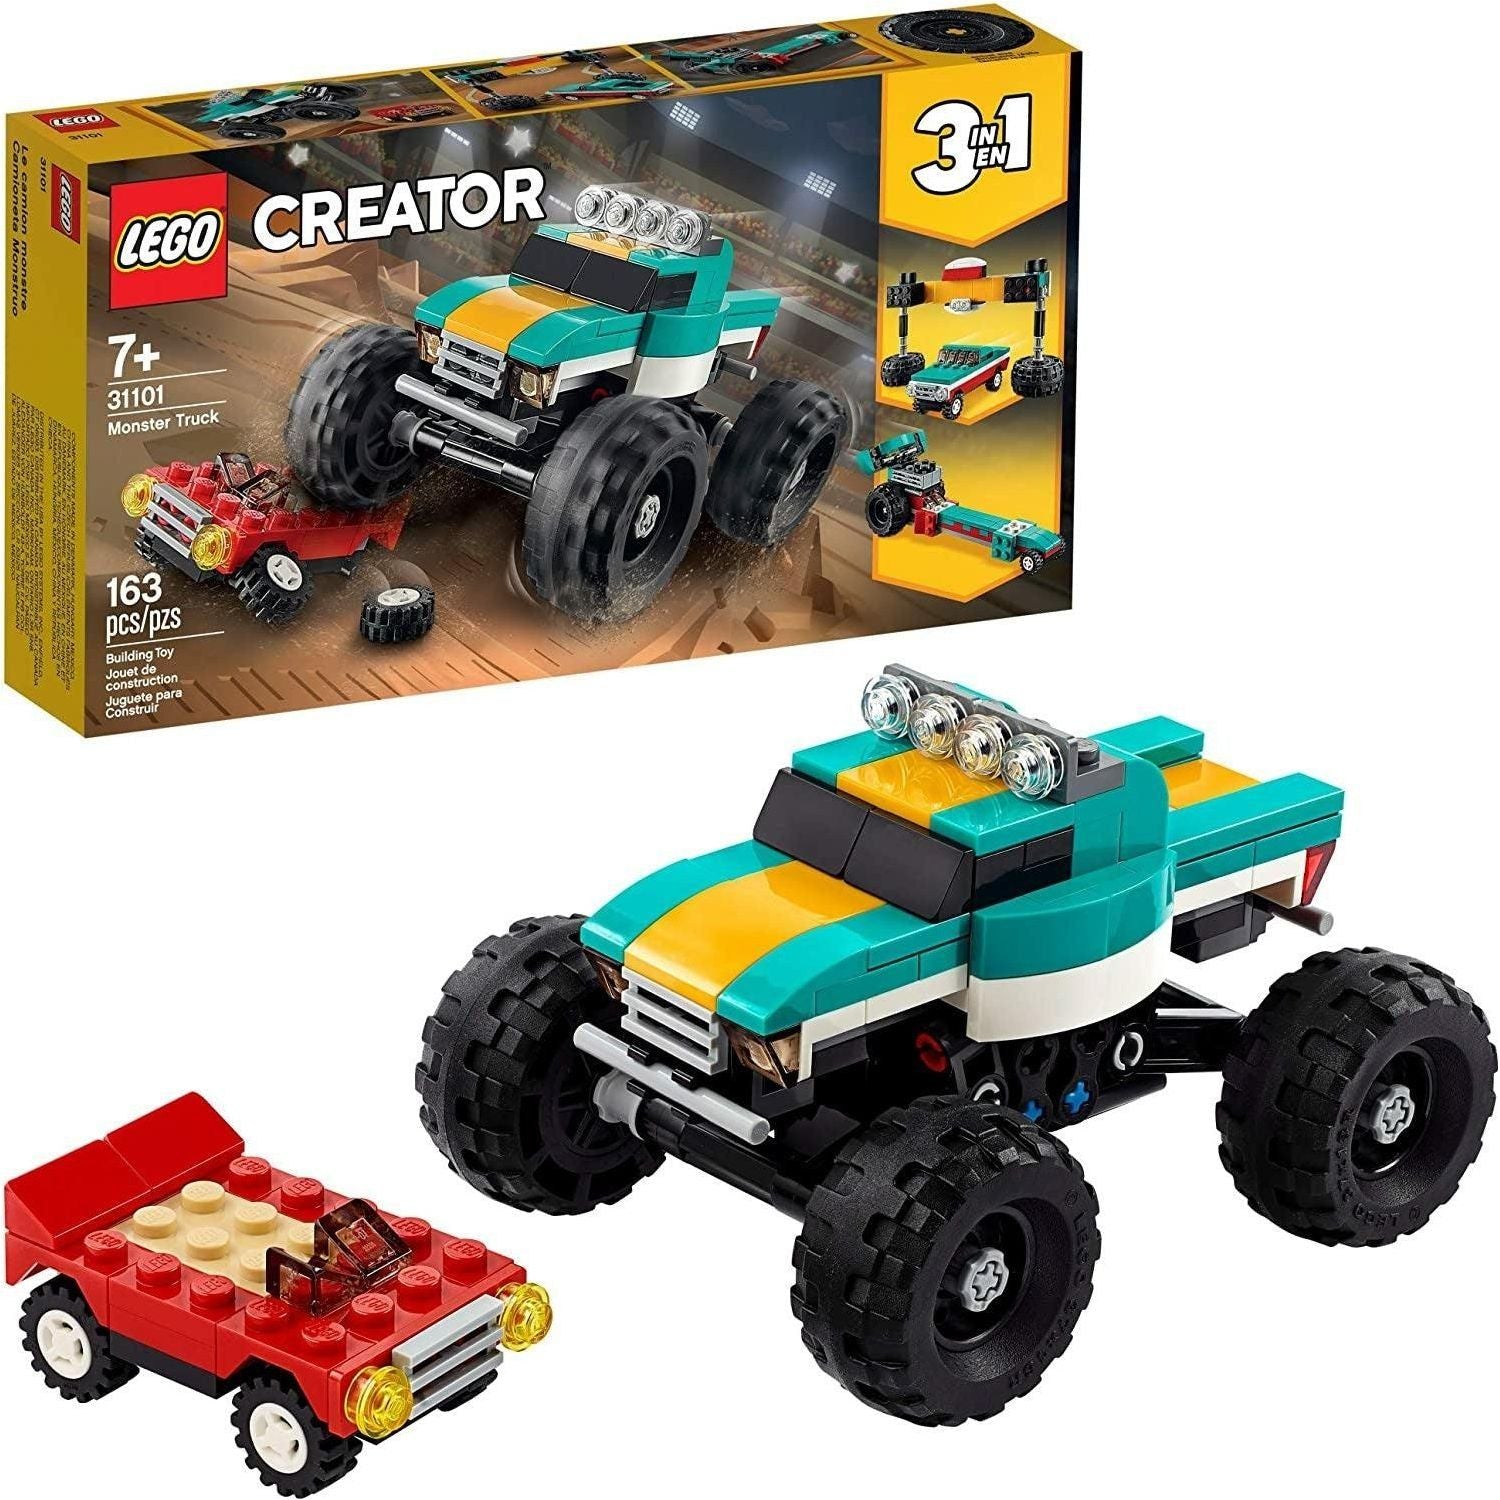 LEGO Creator 3in1 Monster Truck Toy 31101 Cool Building Kit for Kids (163 Pieces) - BumbleToys - 5-7 Years, Boys, Creator 3in1, LEGO, Monster Jam, OXE, Pre-Order